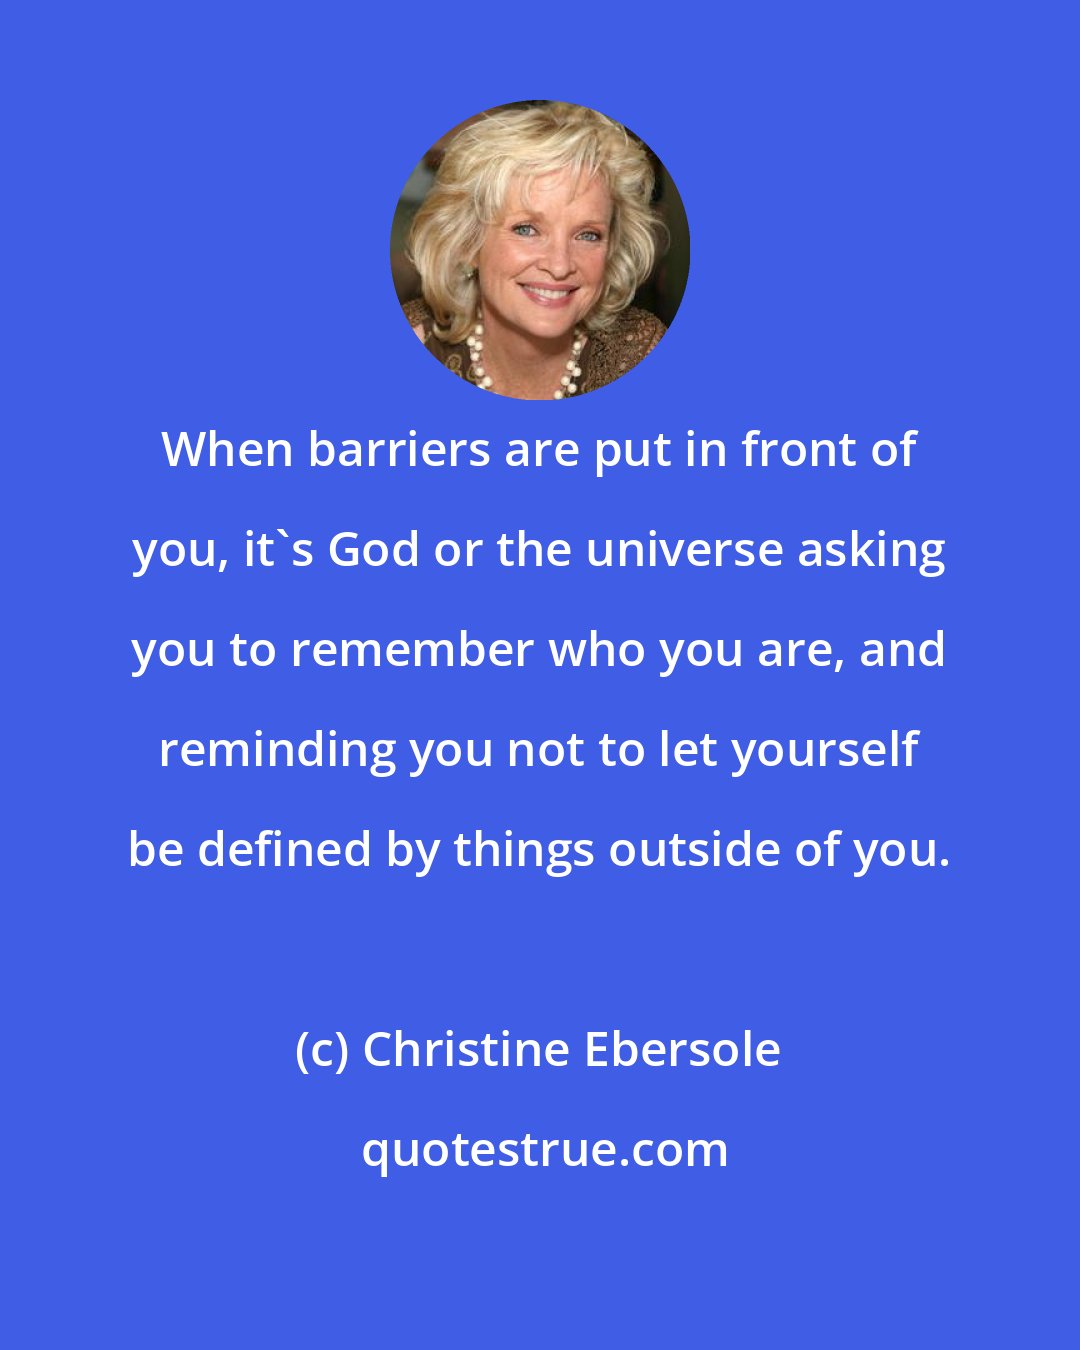 Christine Ebersole: When barriers are put in front of you, it's God or the universe asking you to remember who you are, and reminding you not to let yourself be defined by things outside of you.